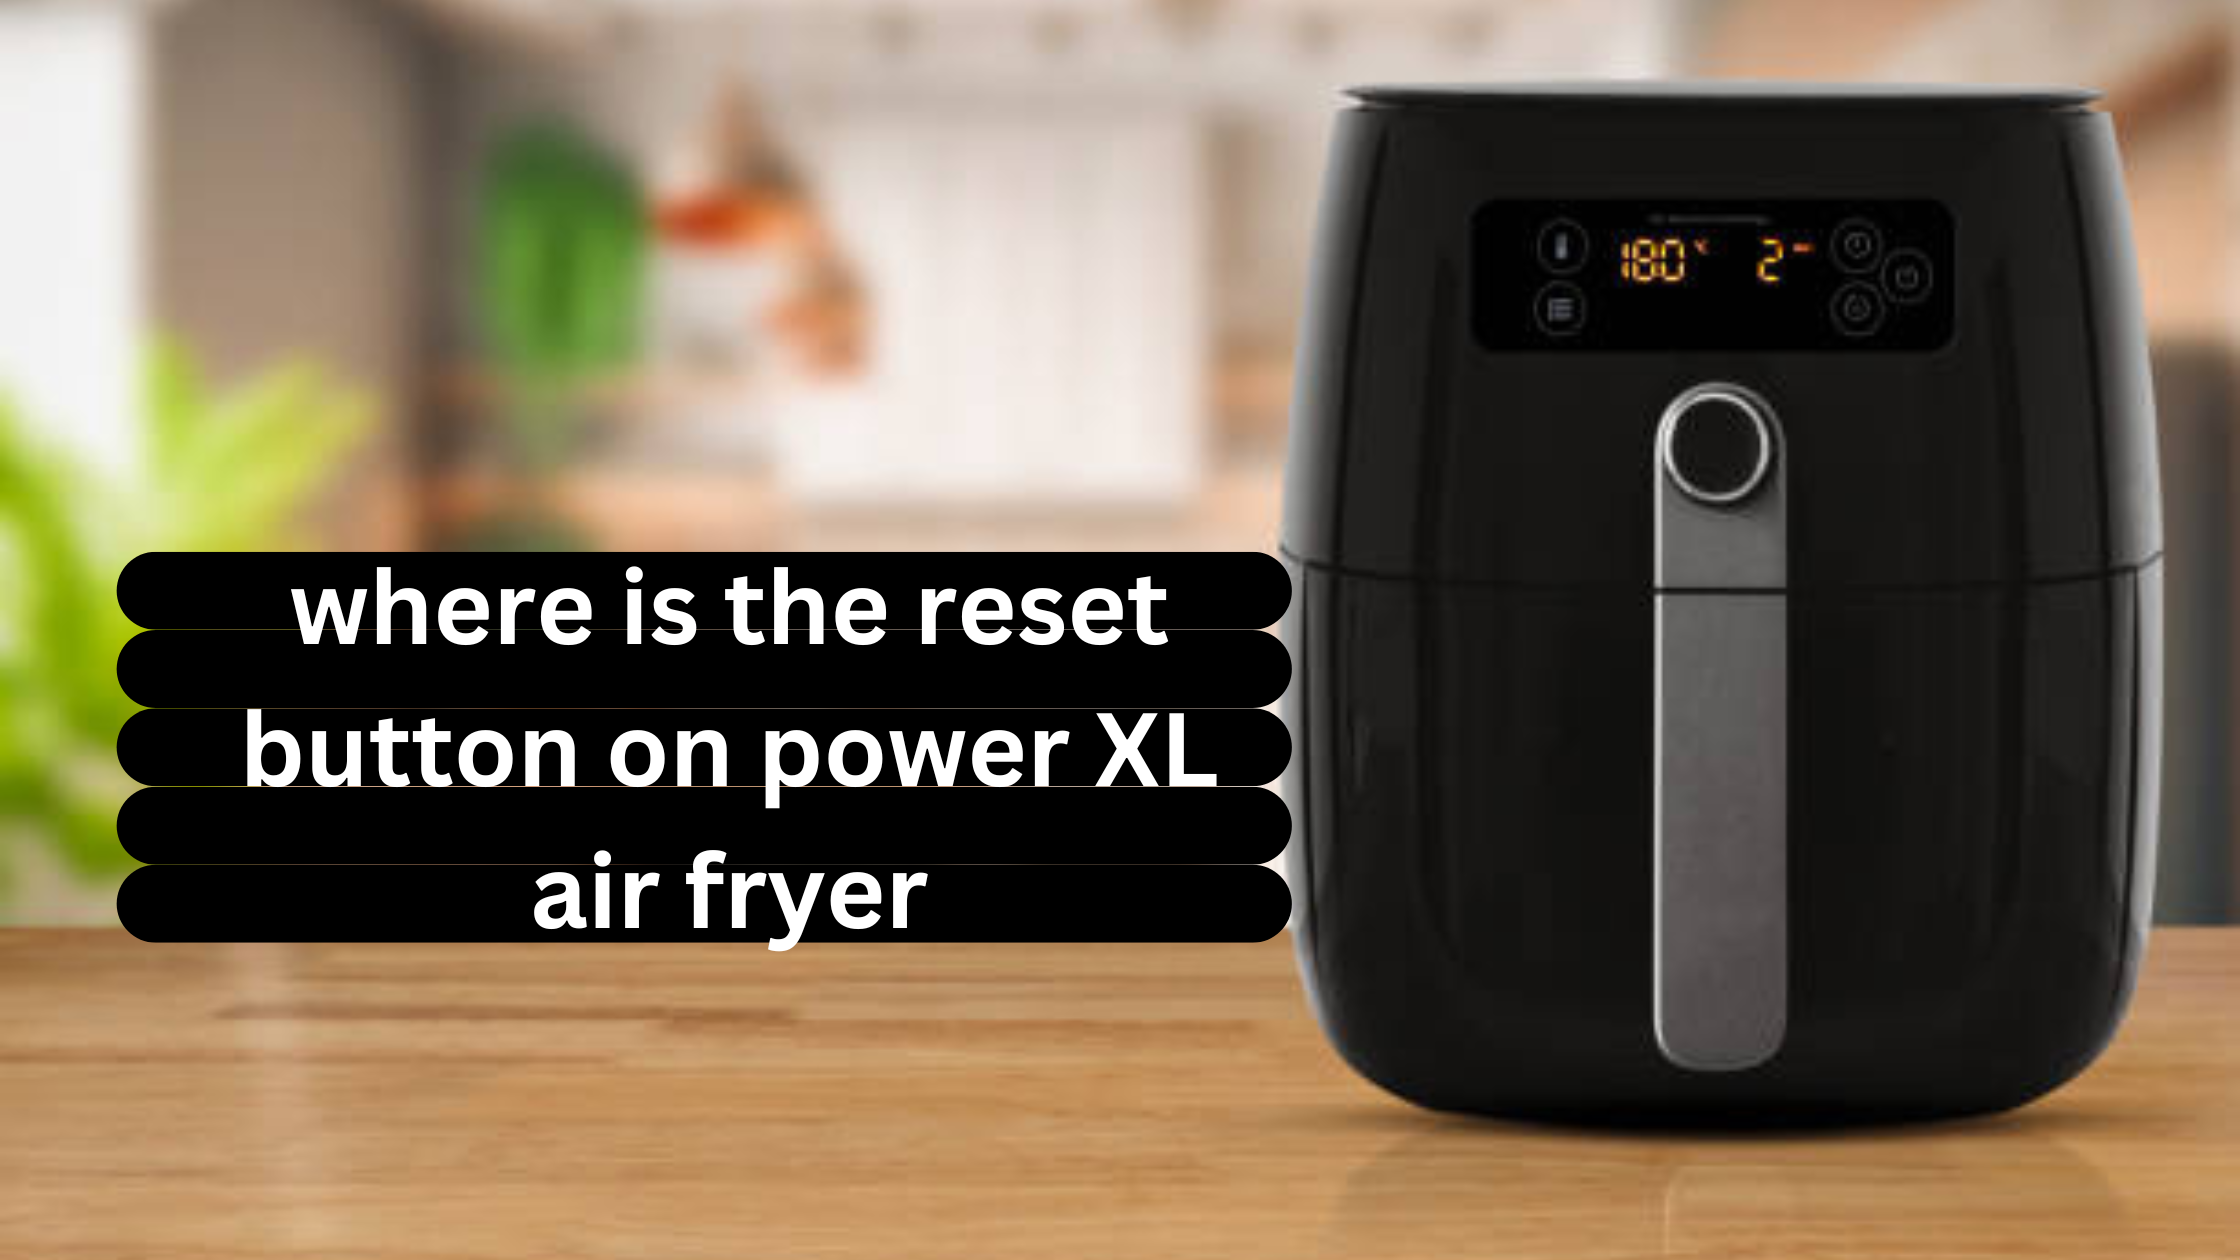 where is the reset button on power XL air fryer